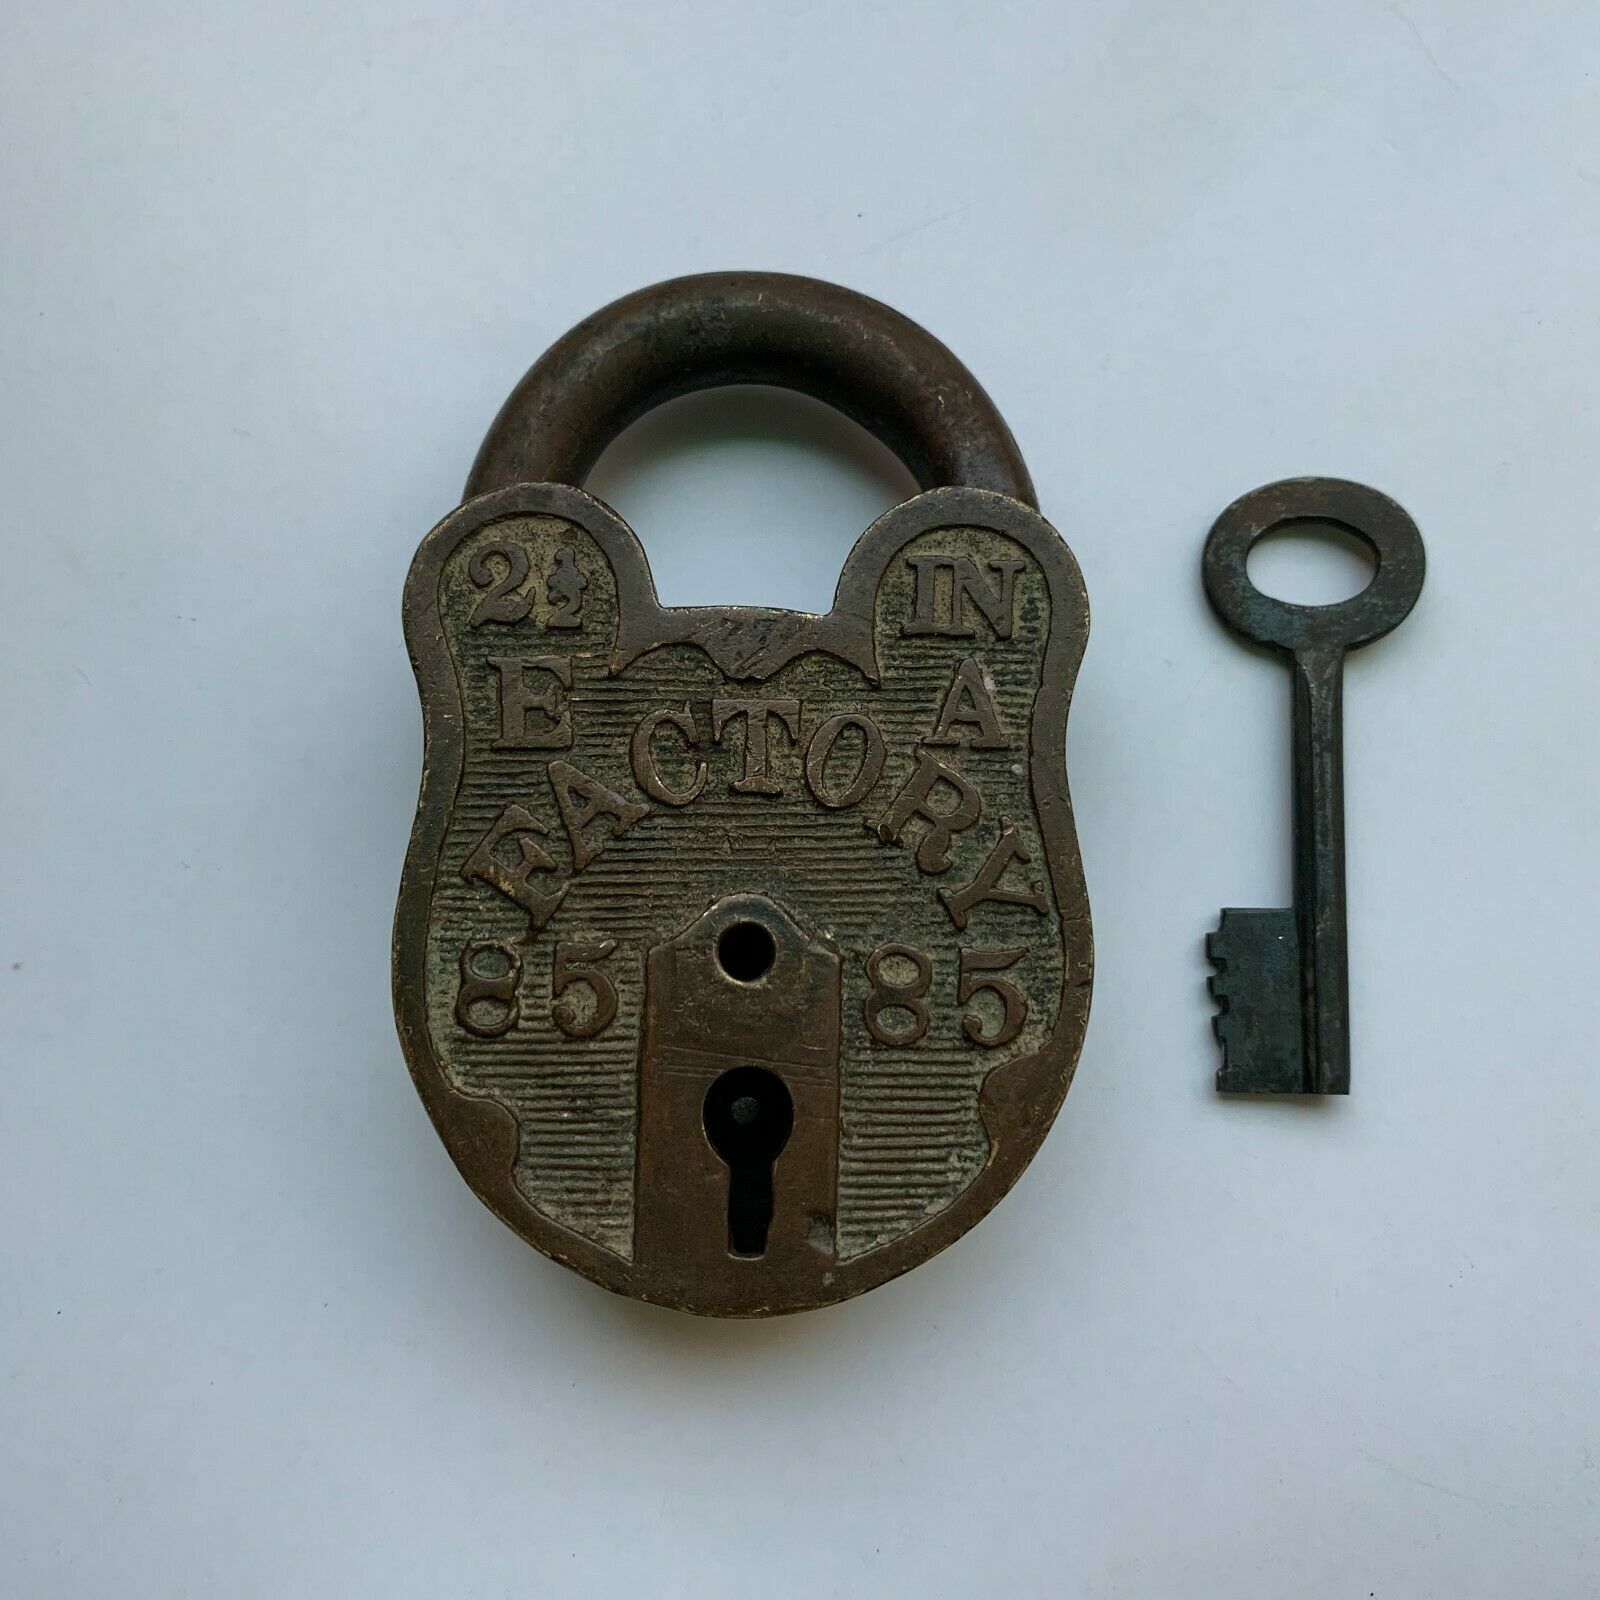 An old or antique brass padlock or lock with key collectible carving